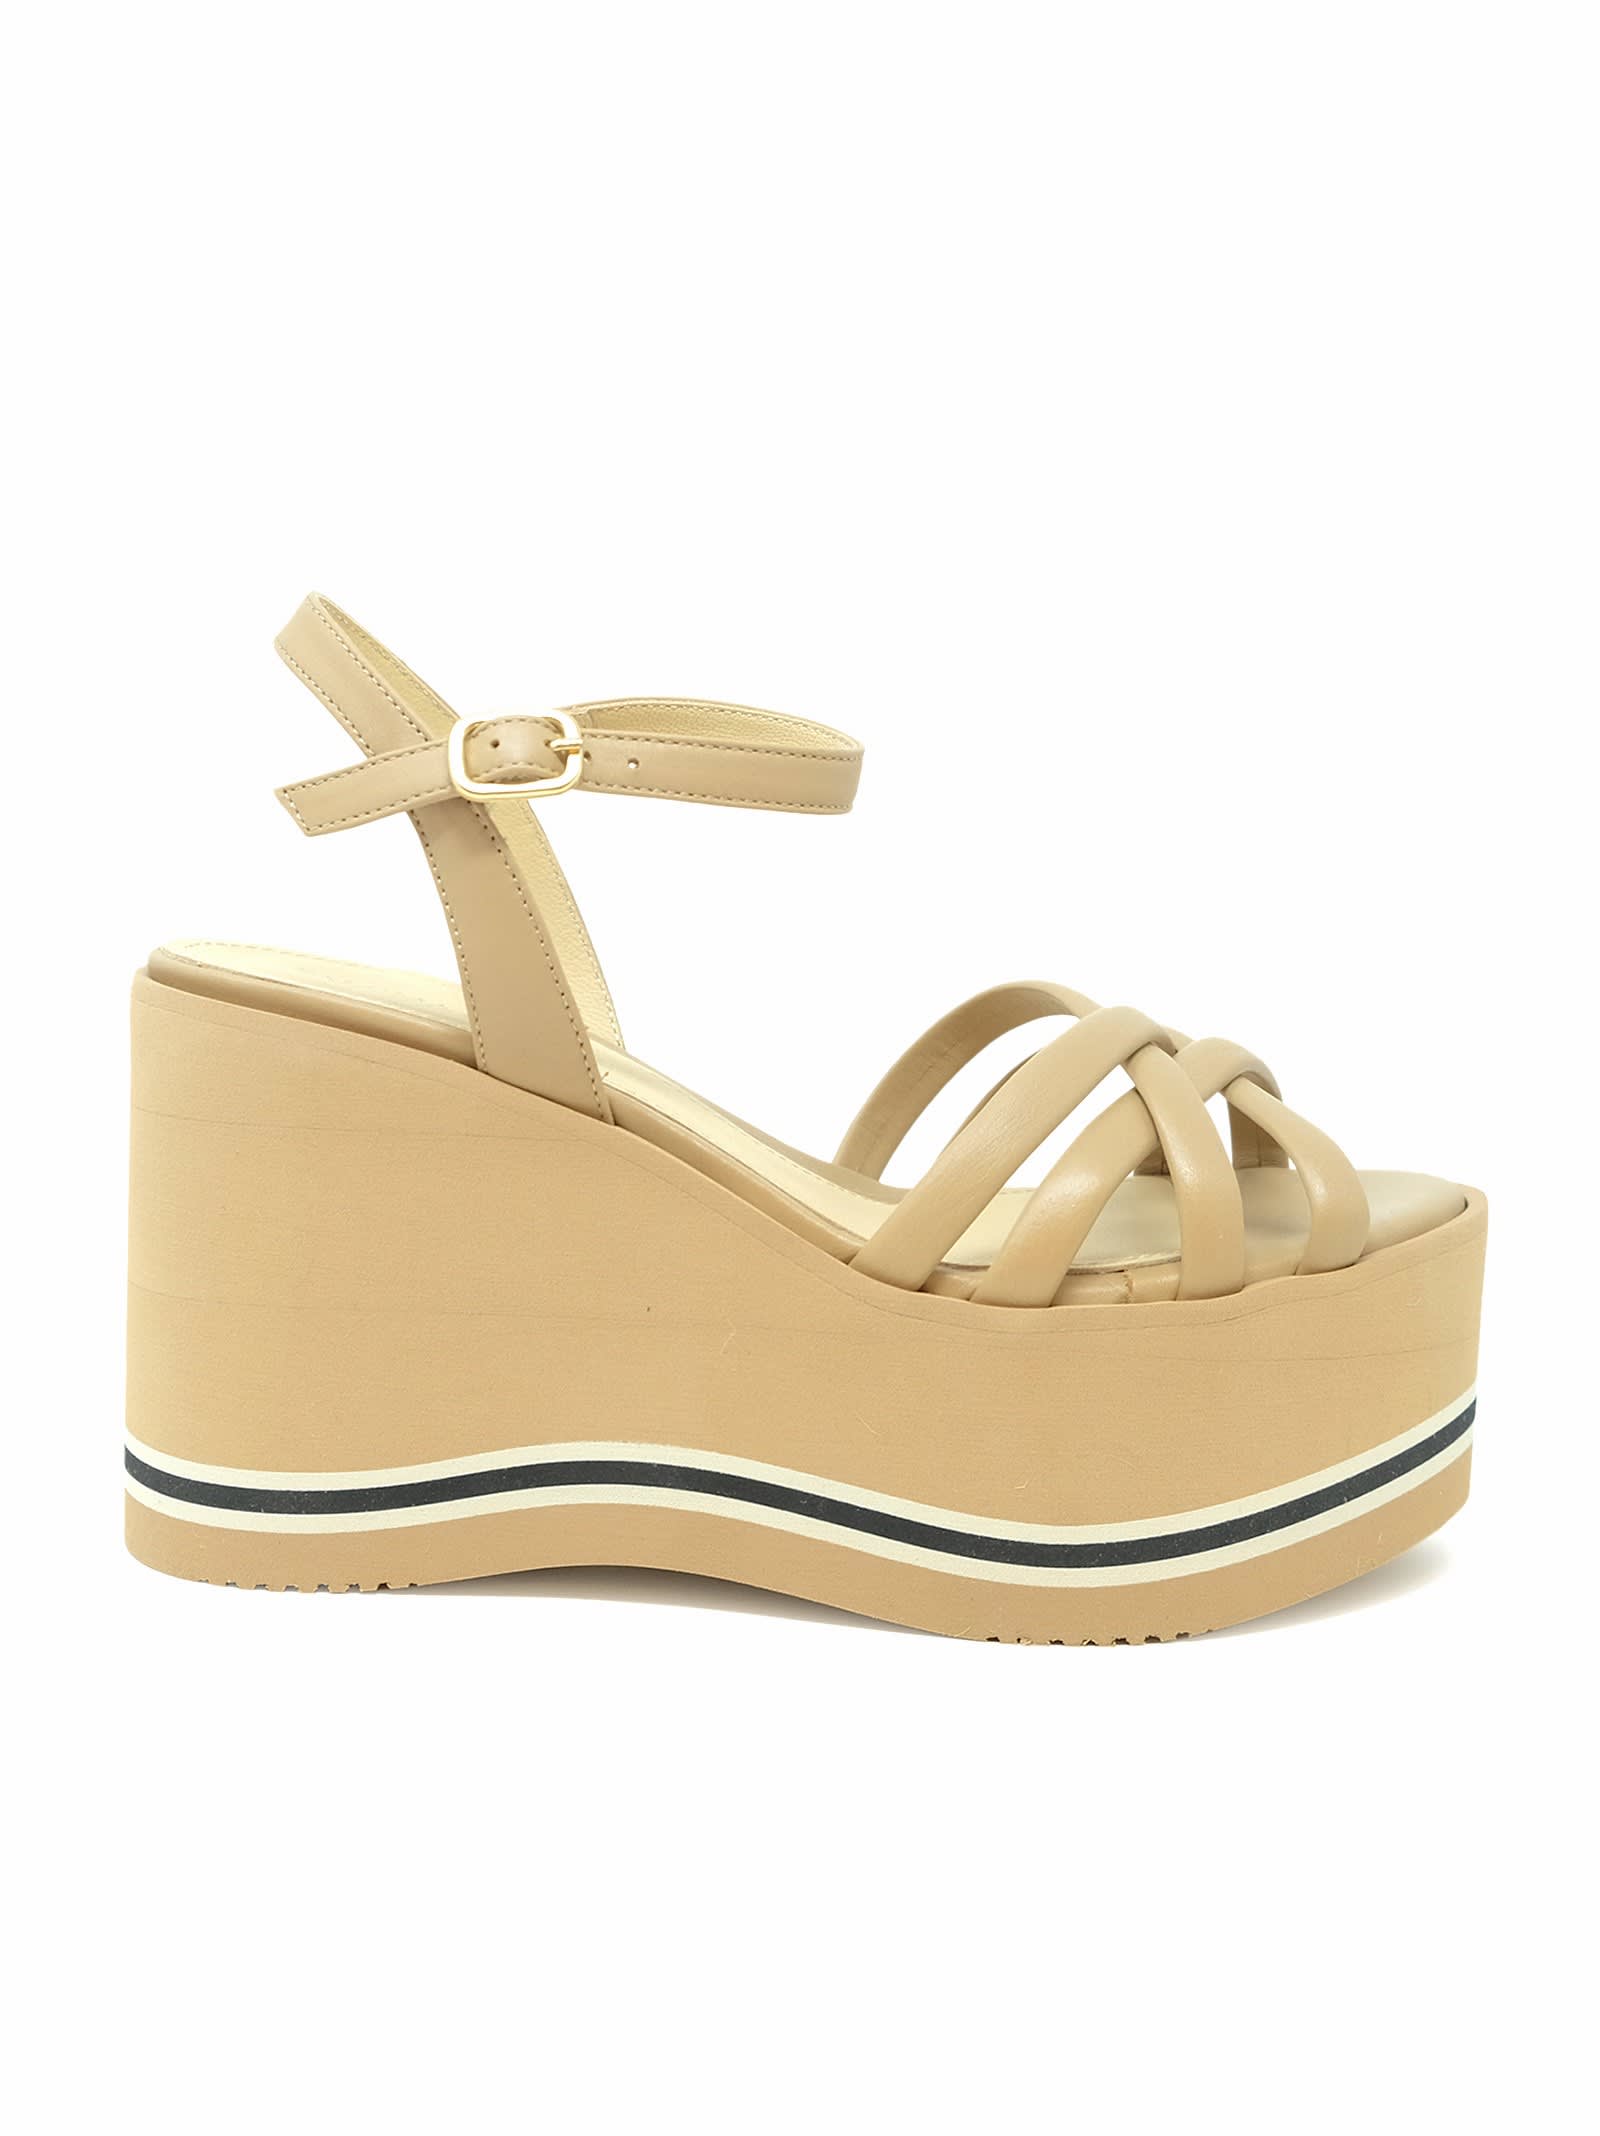 Paloma Barceló Paloma Barcelo 24-1022 Beige Leather Lioba Wedge Sandals In Neutral